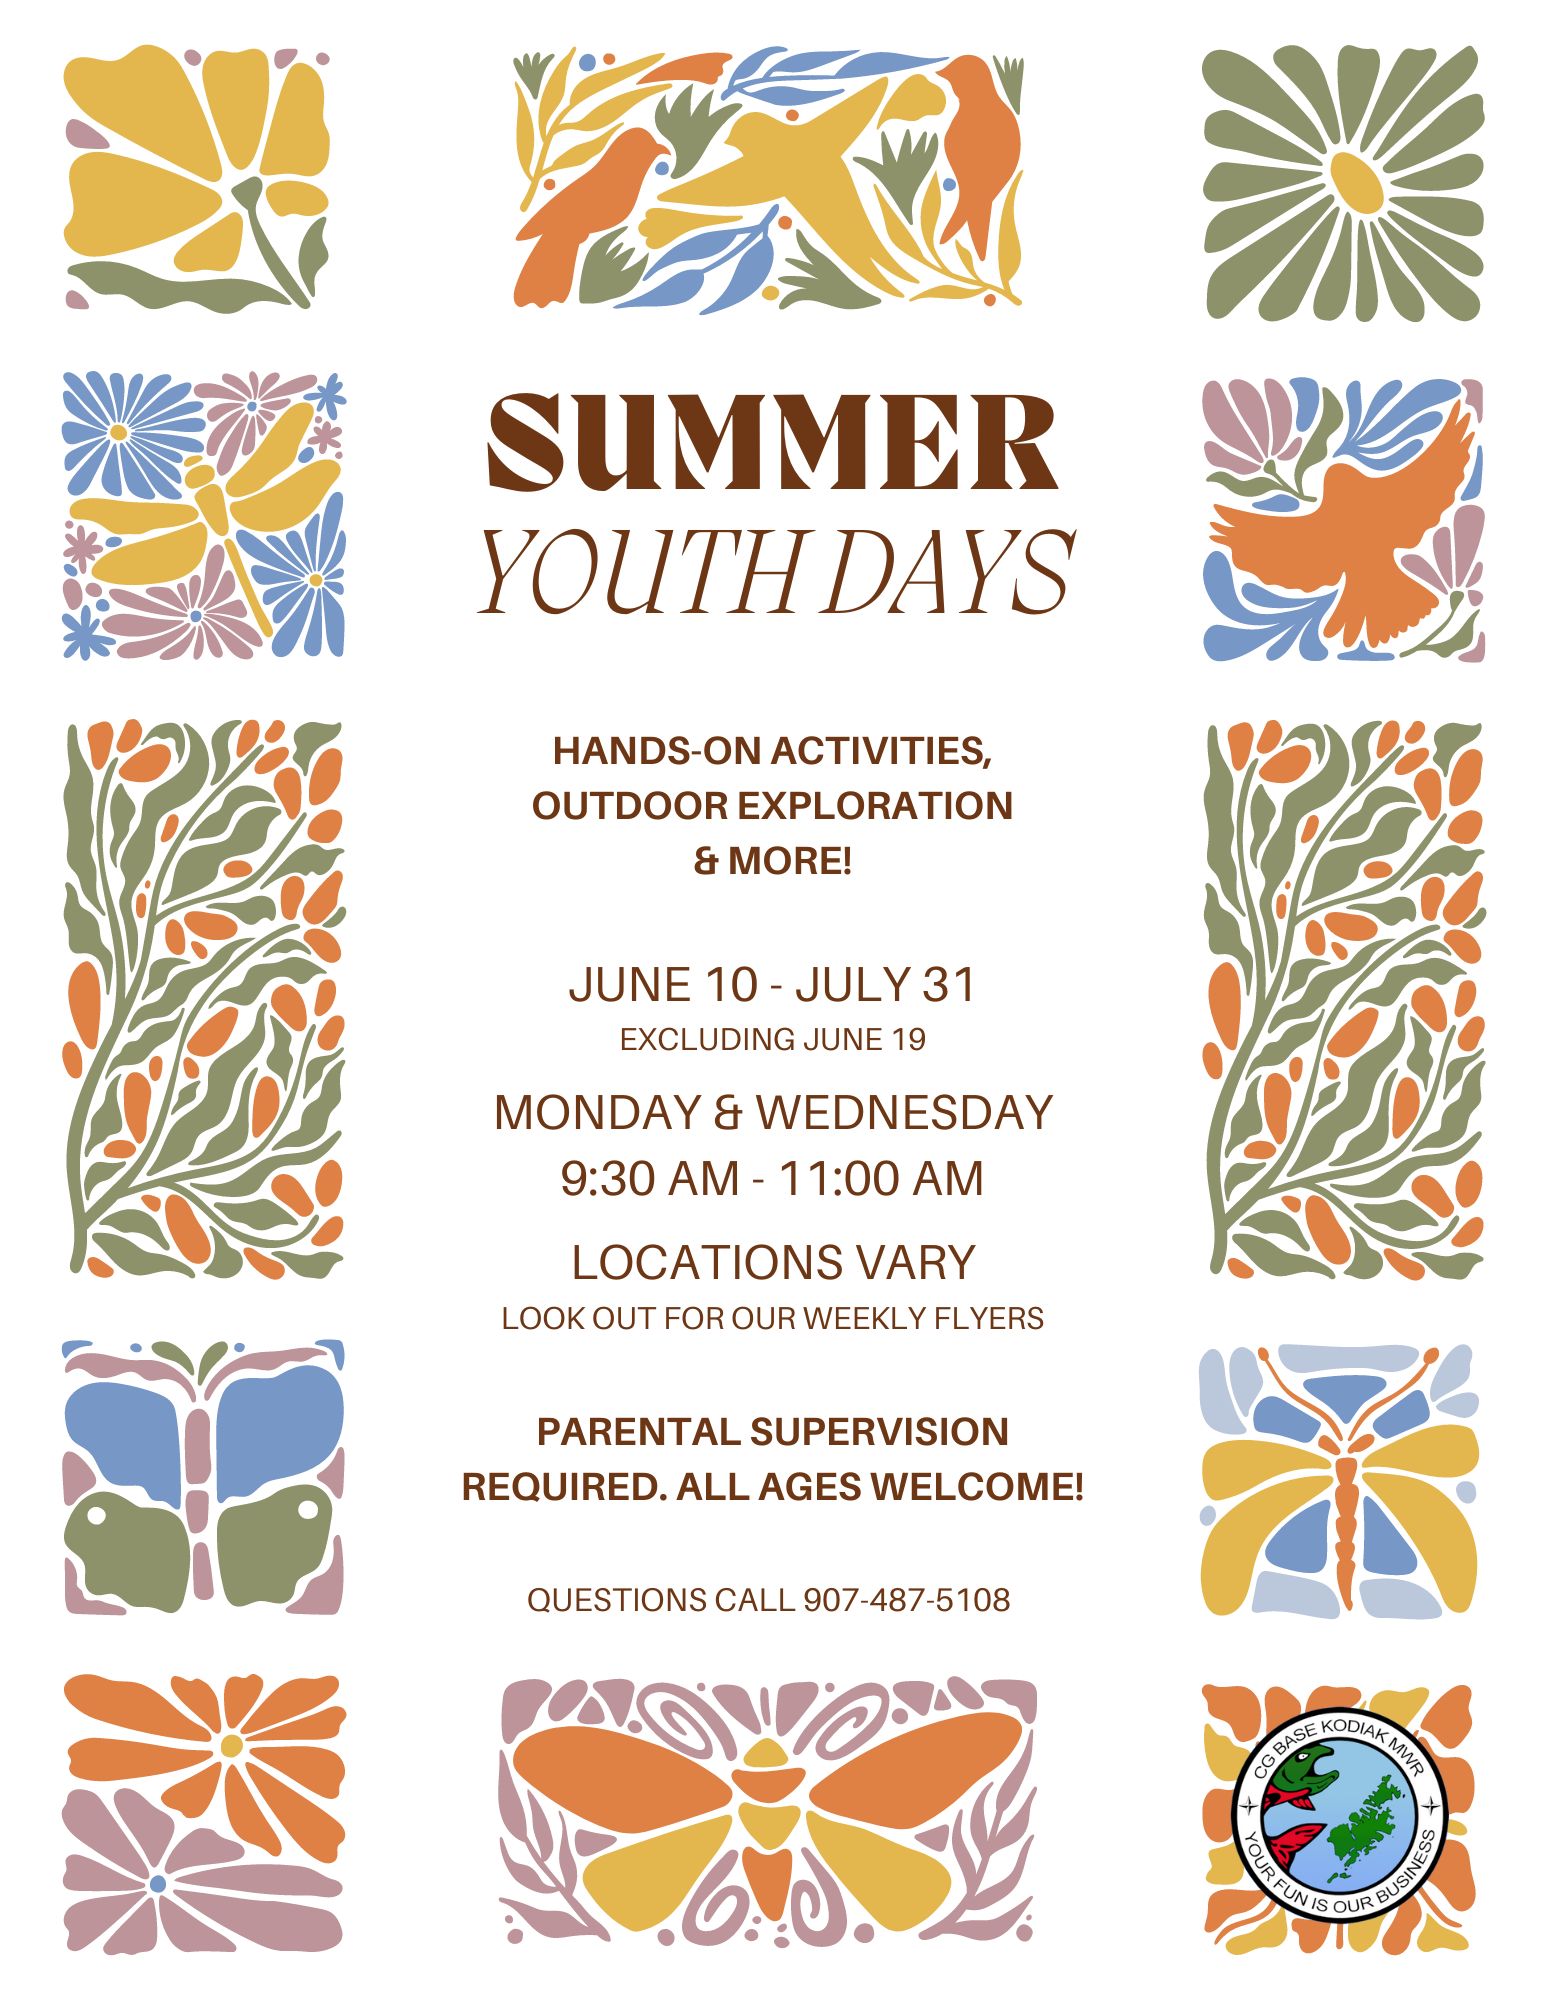 Summer Youth Days